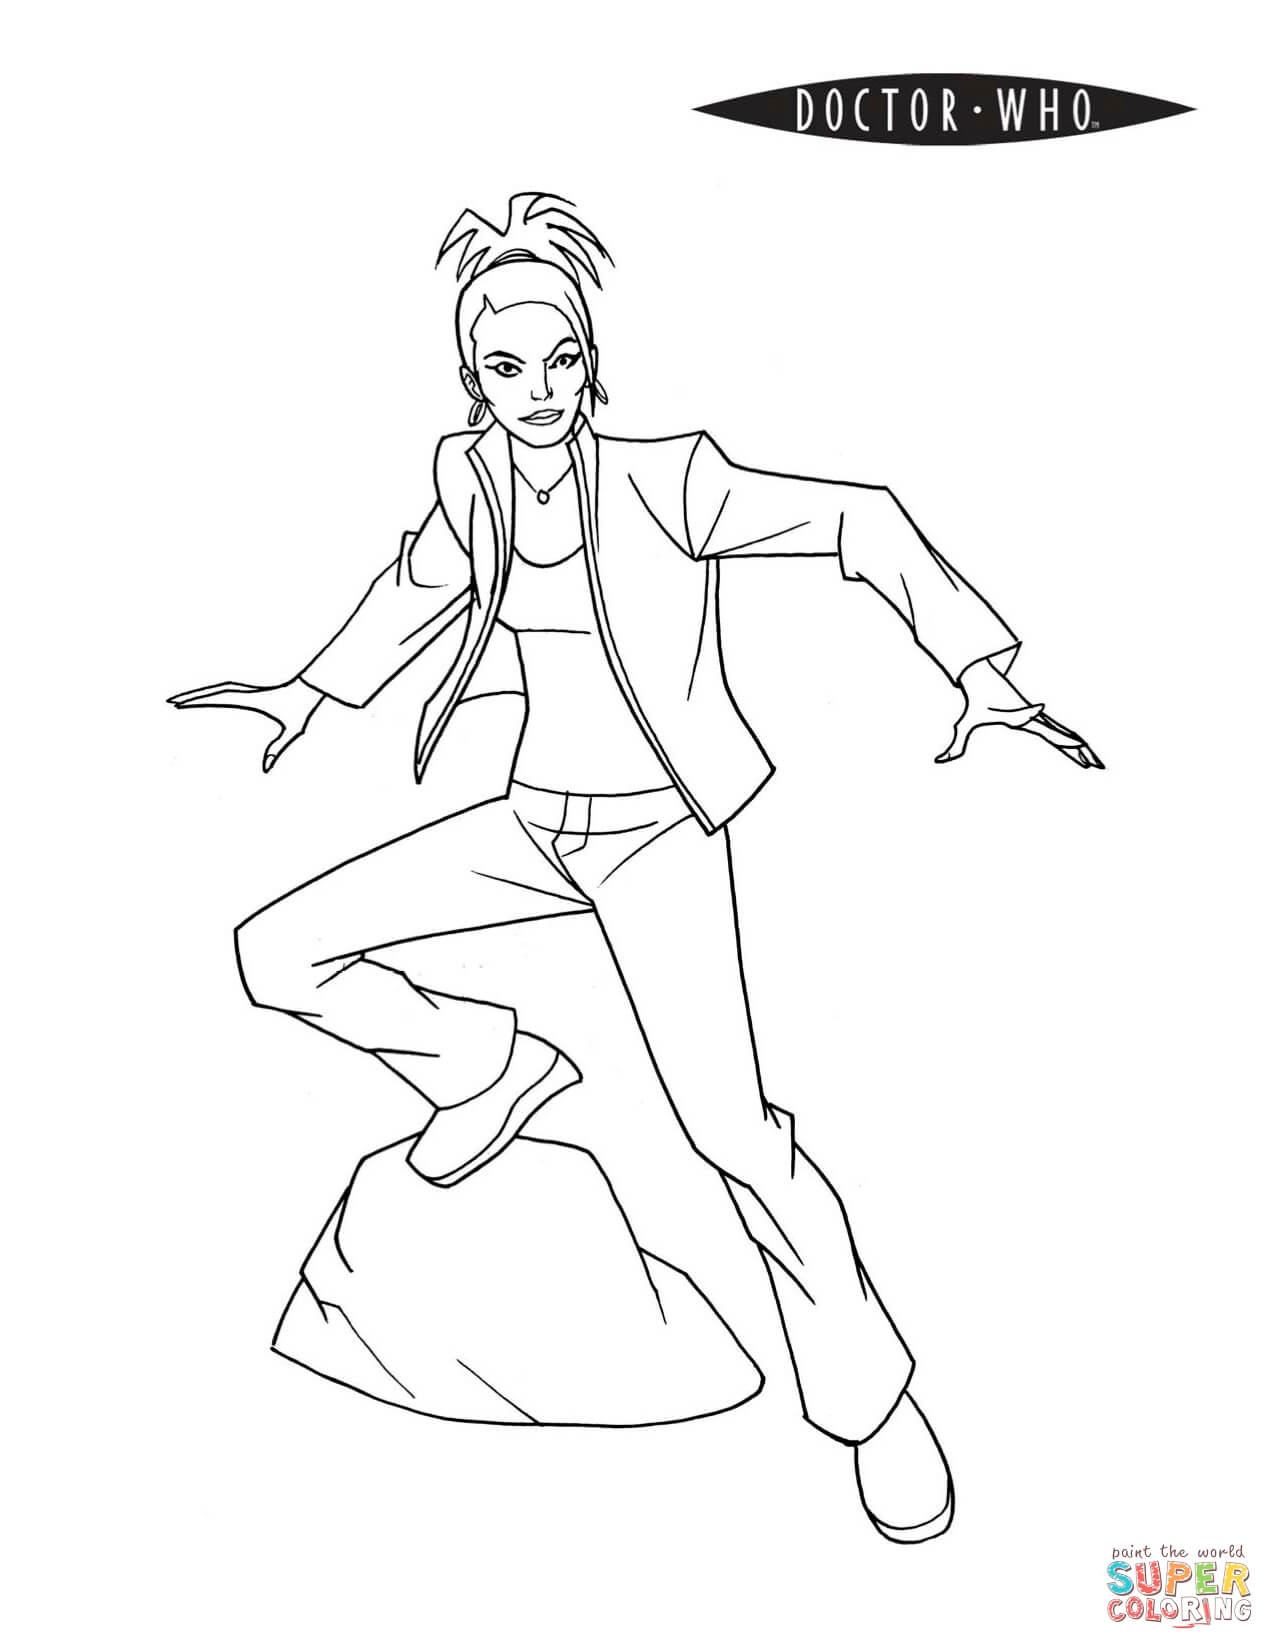 Doctor Who Coloring Pages
 Martha Jones from Doctor Who coloring page